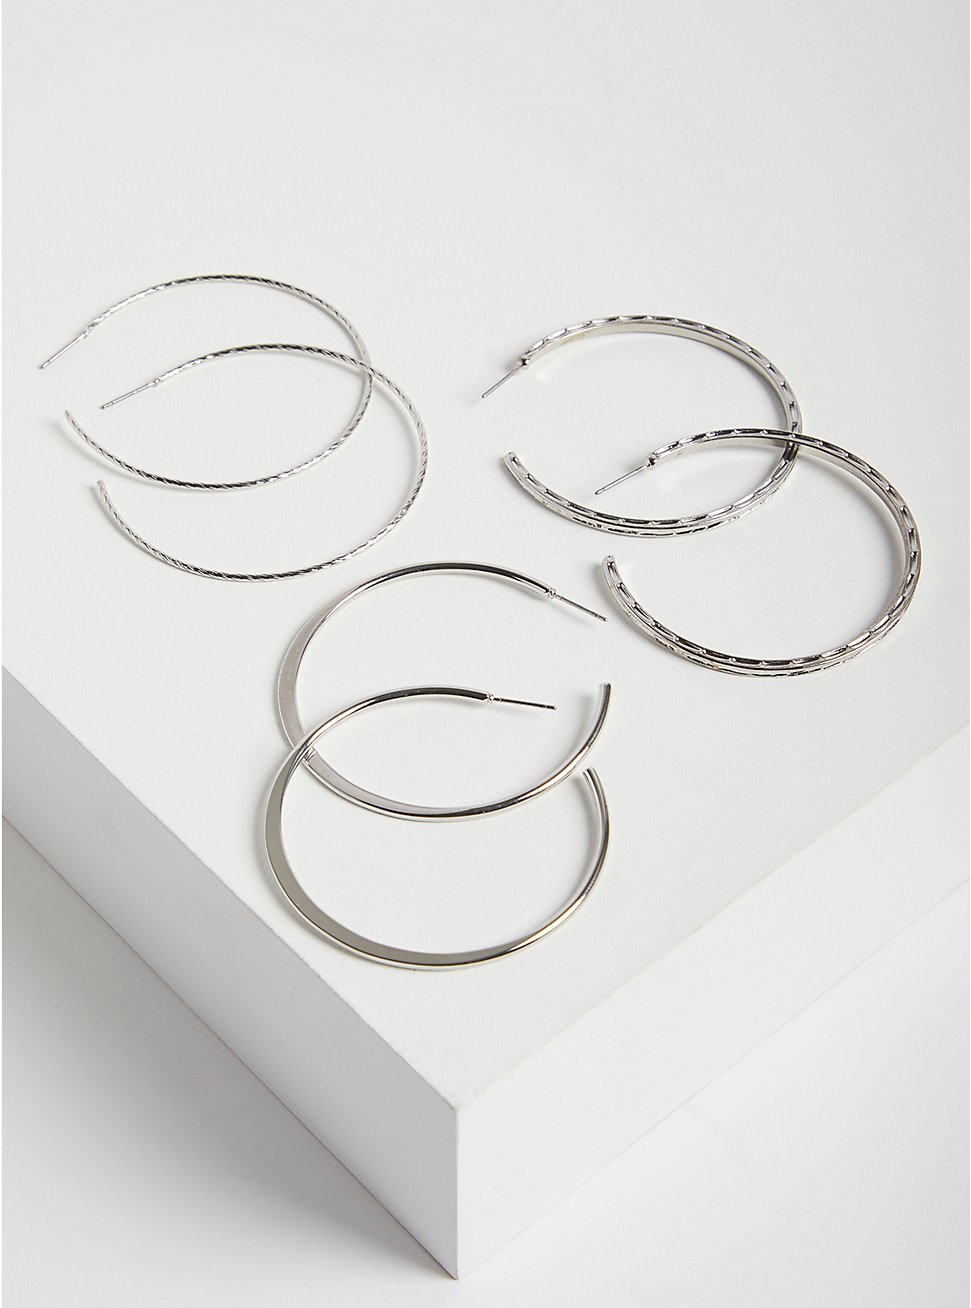 Plus Size Trio Textured Hoop Earring - Silver Tone, , hi-res